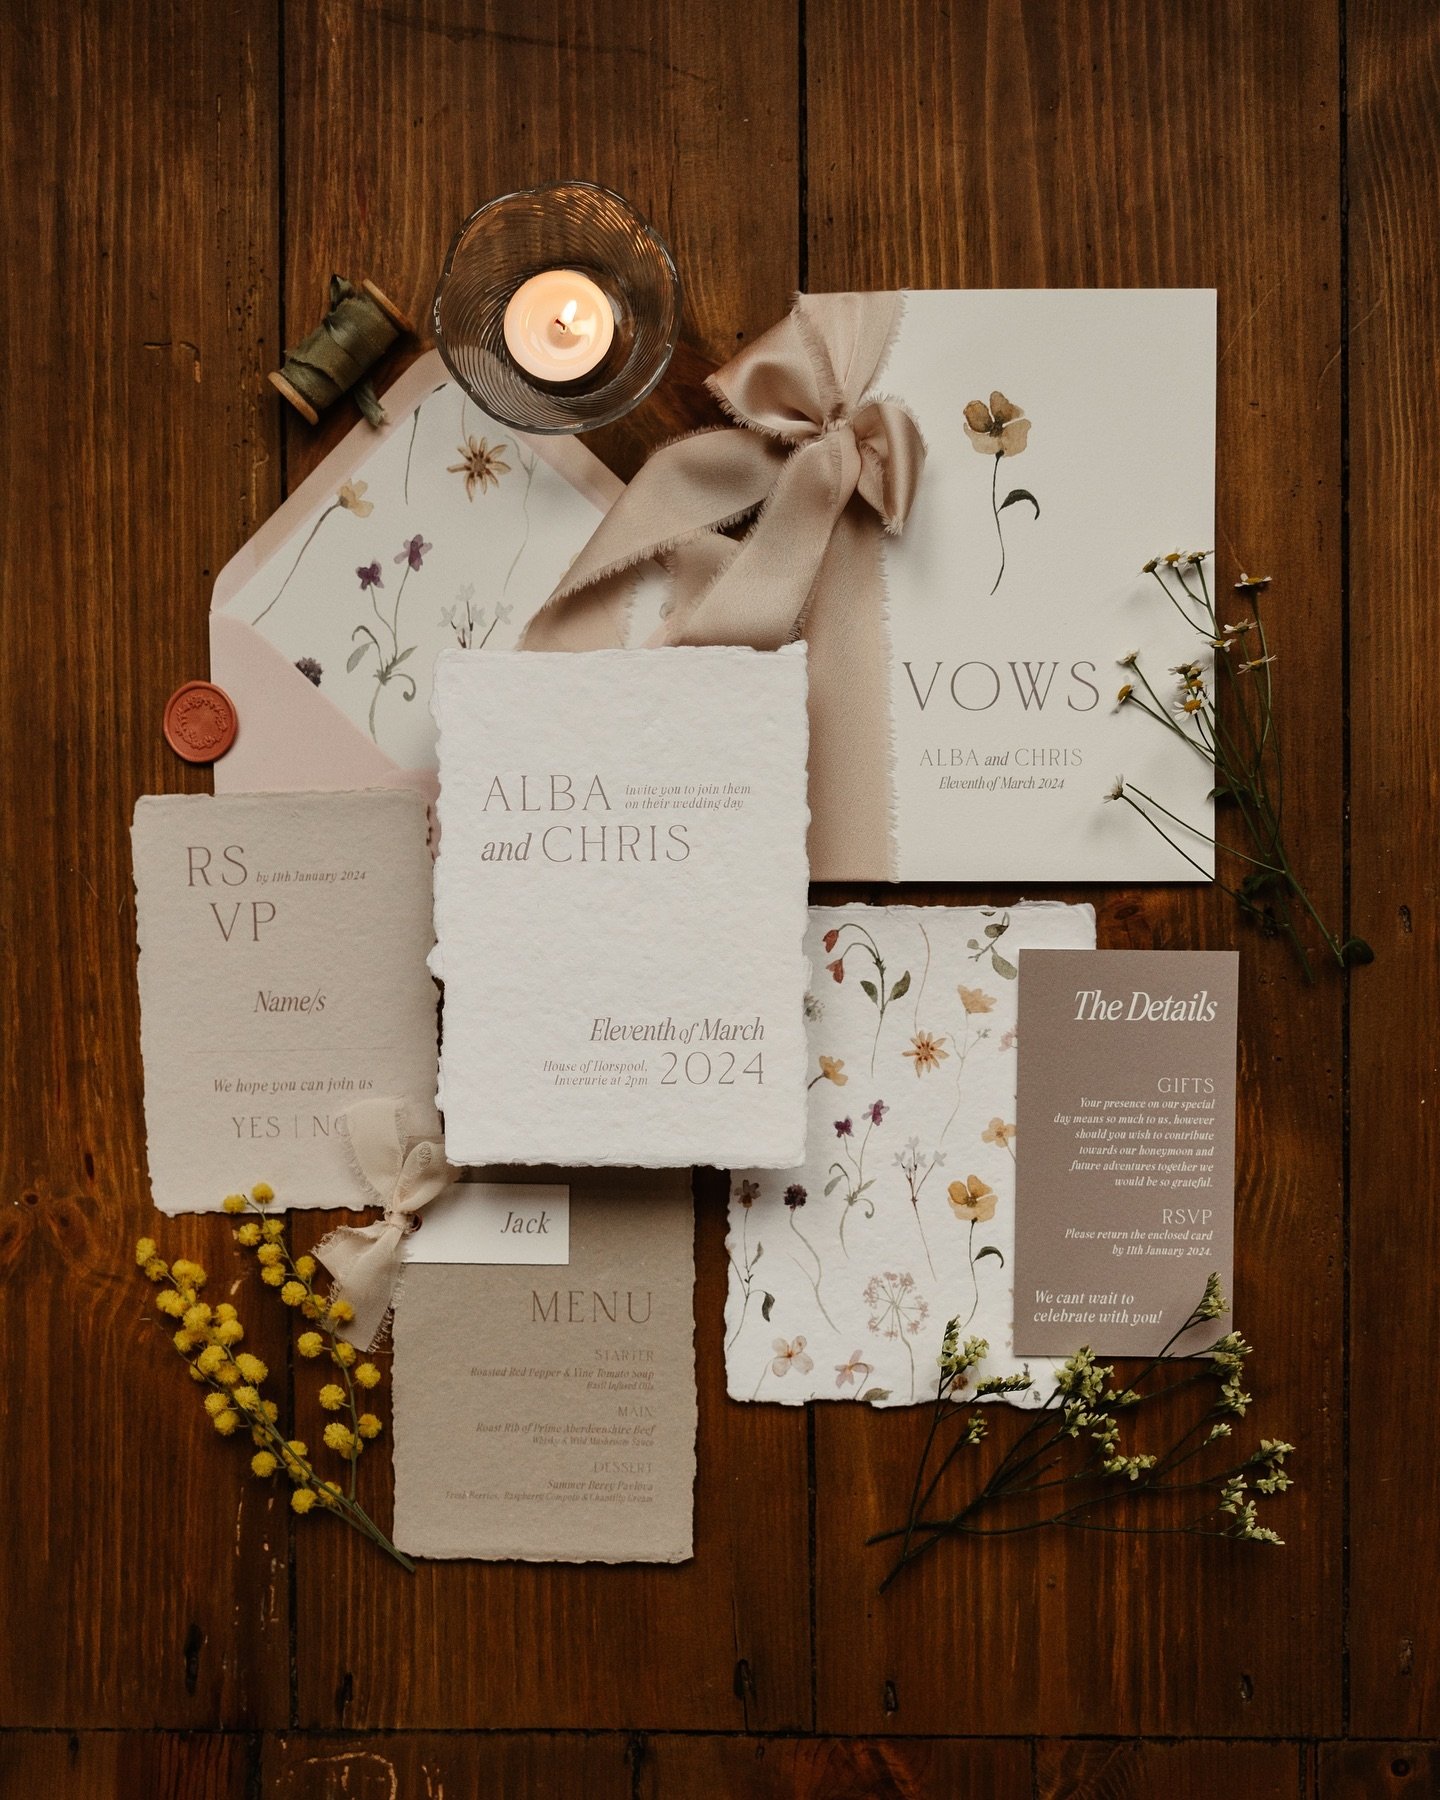 Co-ordinating vows books are my favourite item to create right now - pretty, functional and a lovely keepsake 👌🏻🌼

Styling &amp; florals @kimdalglishflorist 
Photography @emmalawsonphoto 
Venue @houseofhorspool 
Stationery &amp; Signage @lovepaper